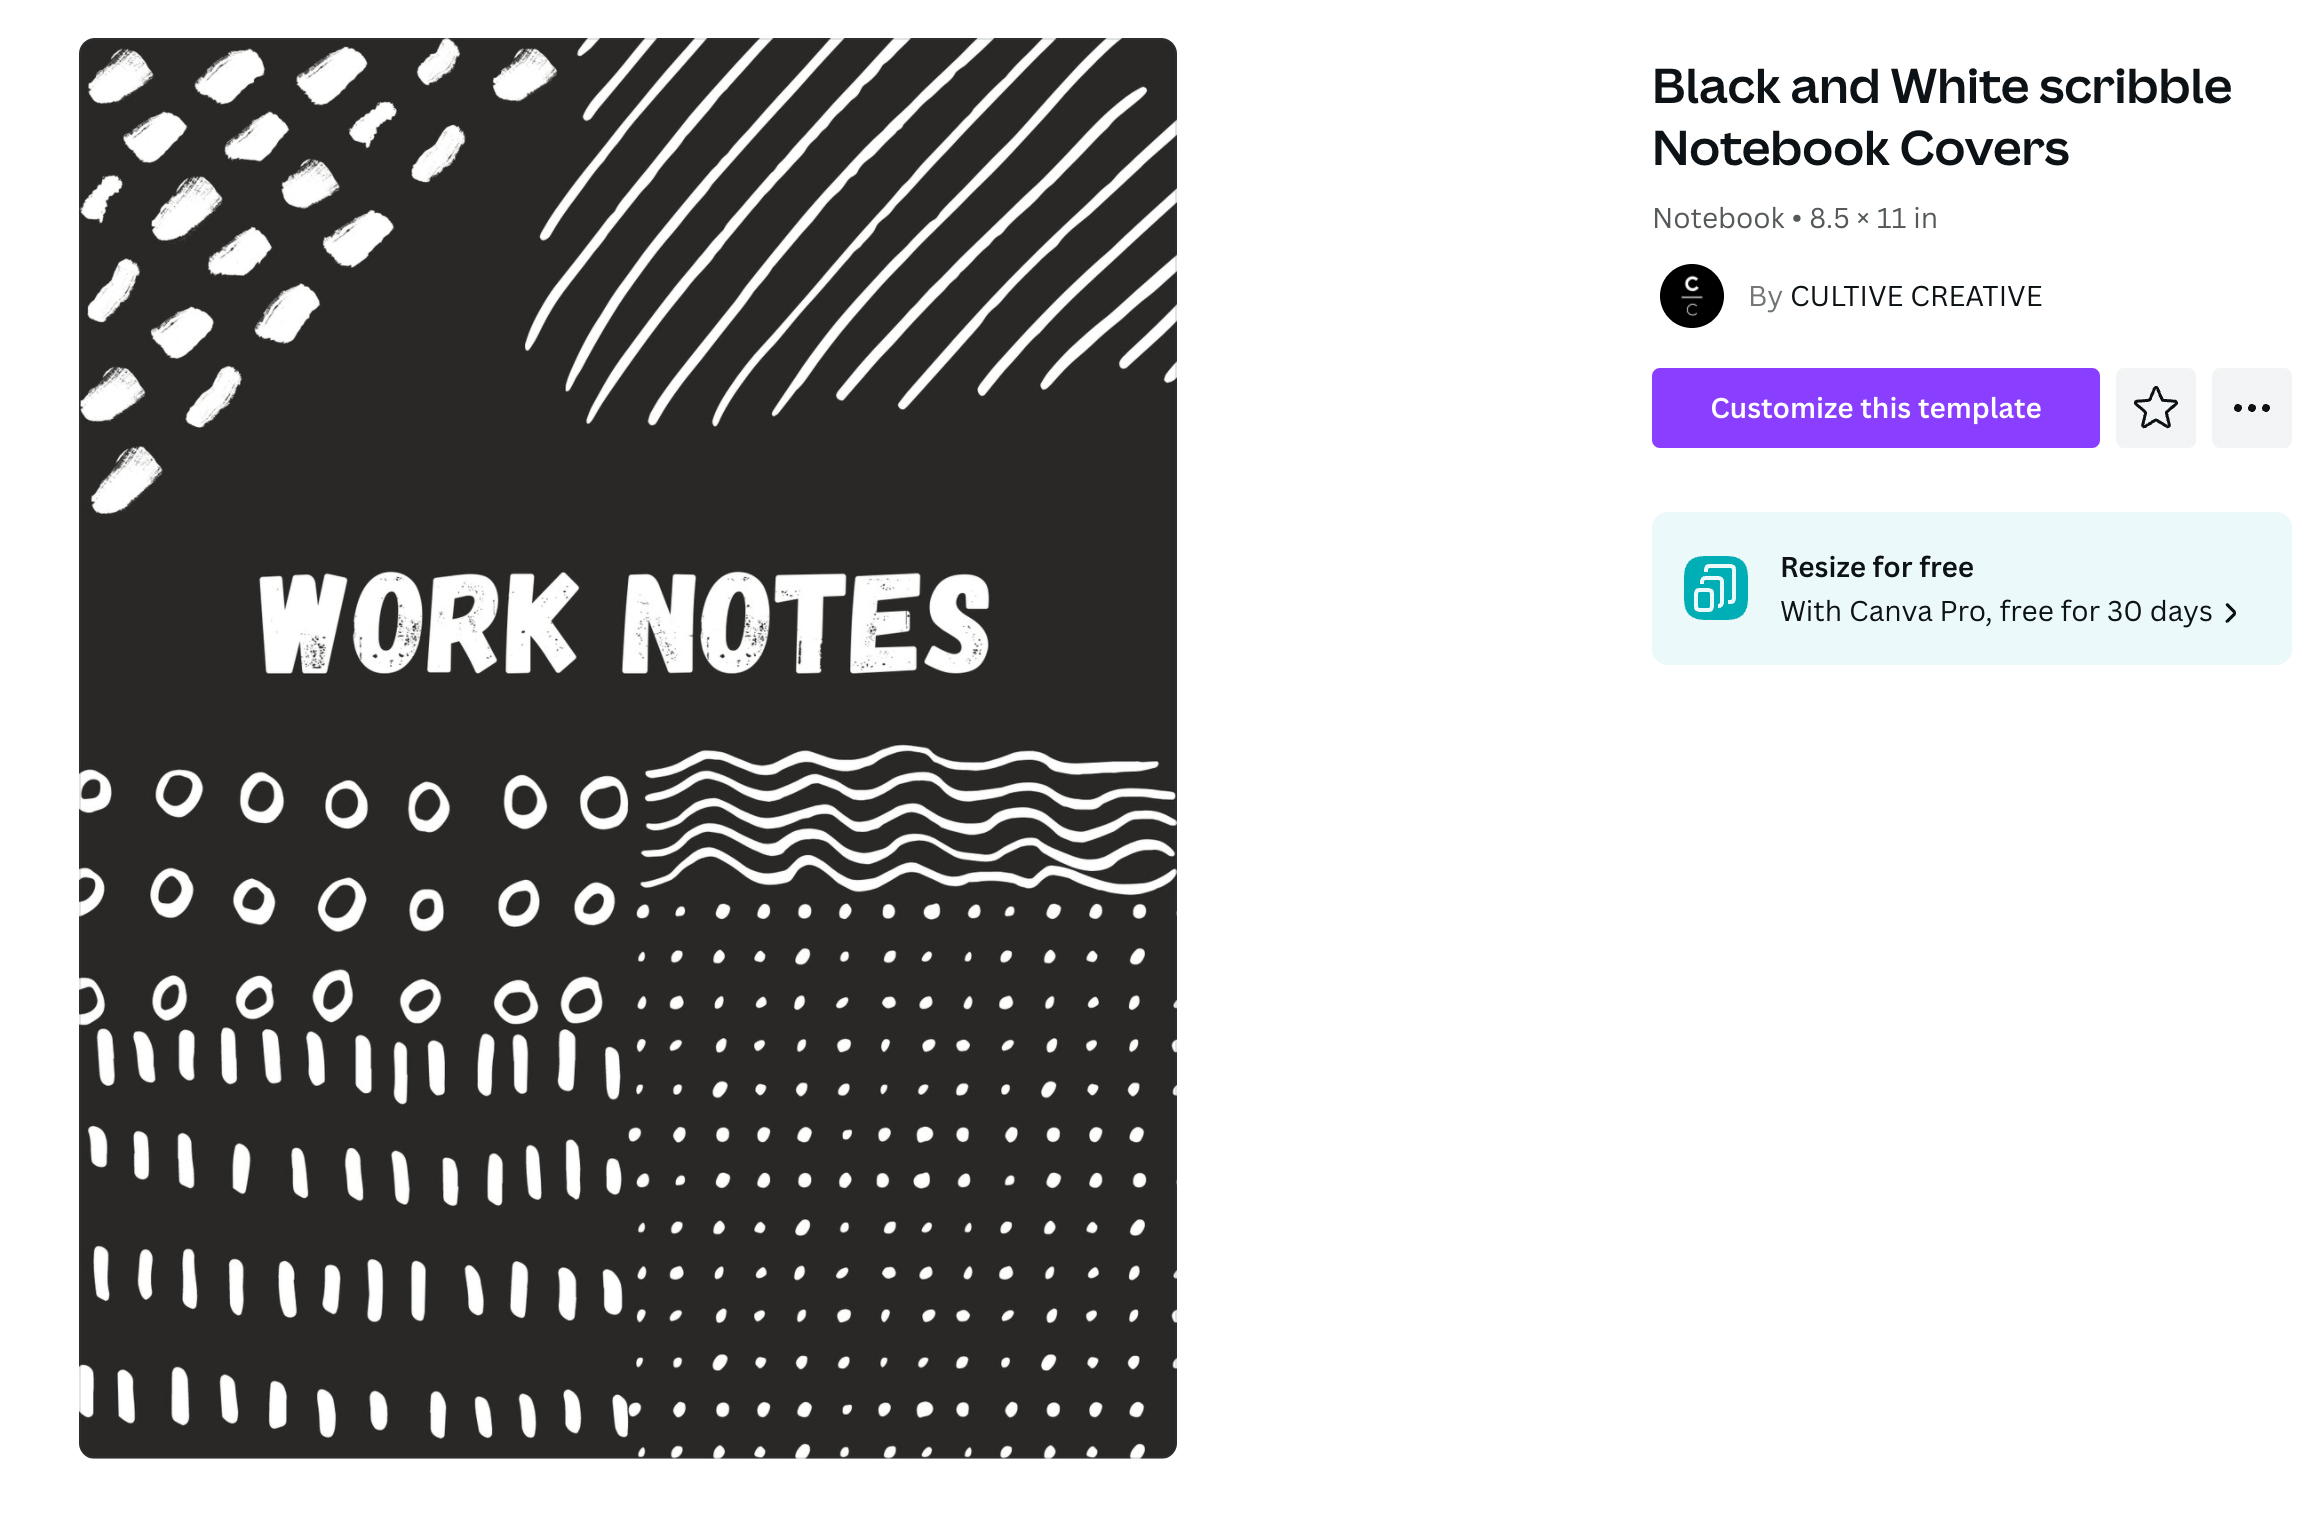 A black and white notebook cover with doodled patterns